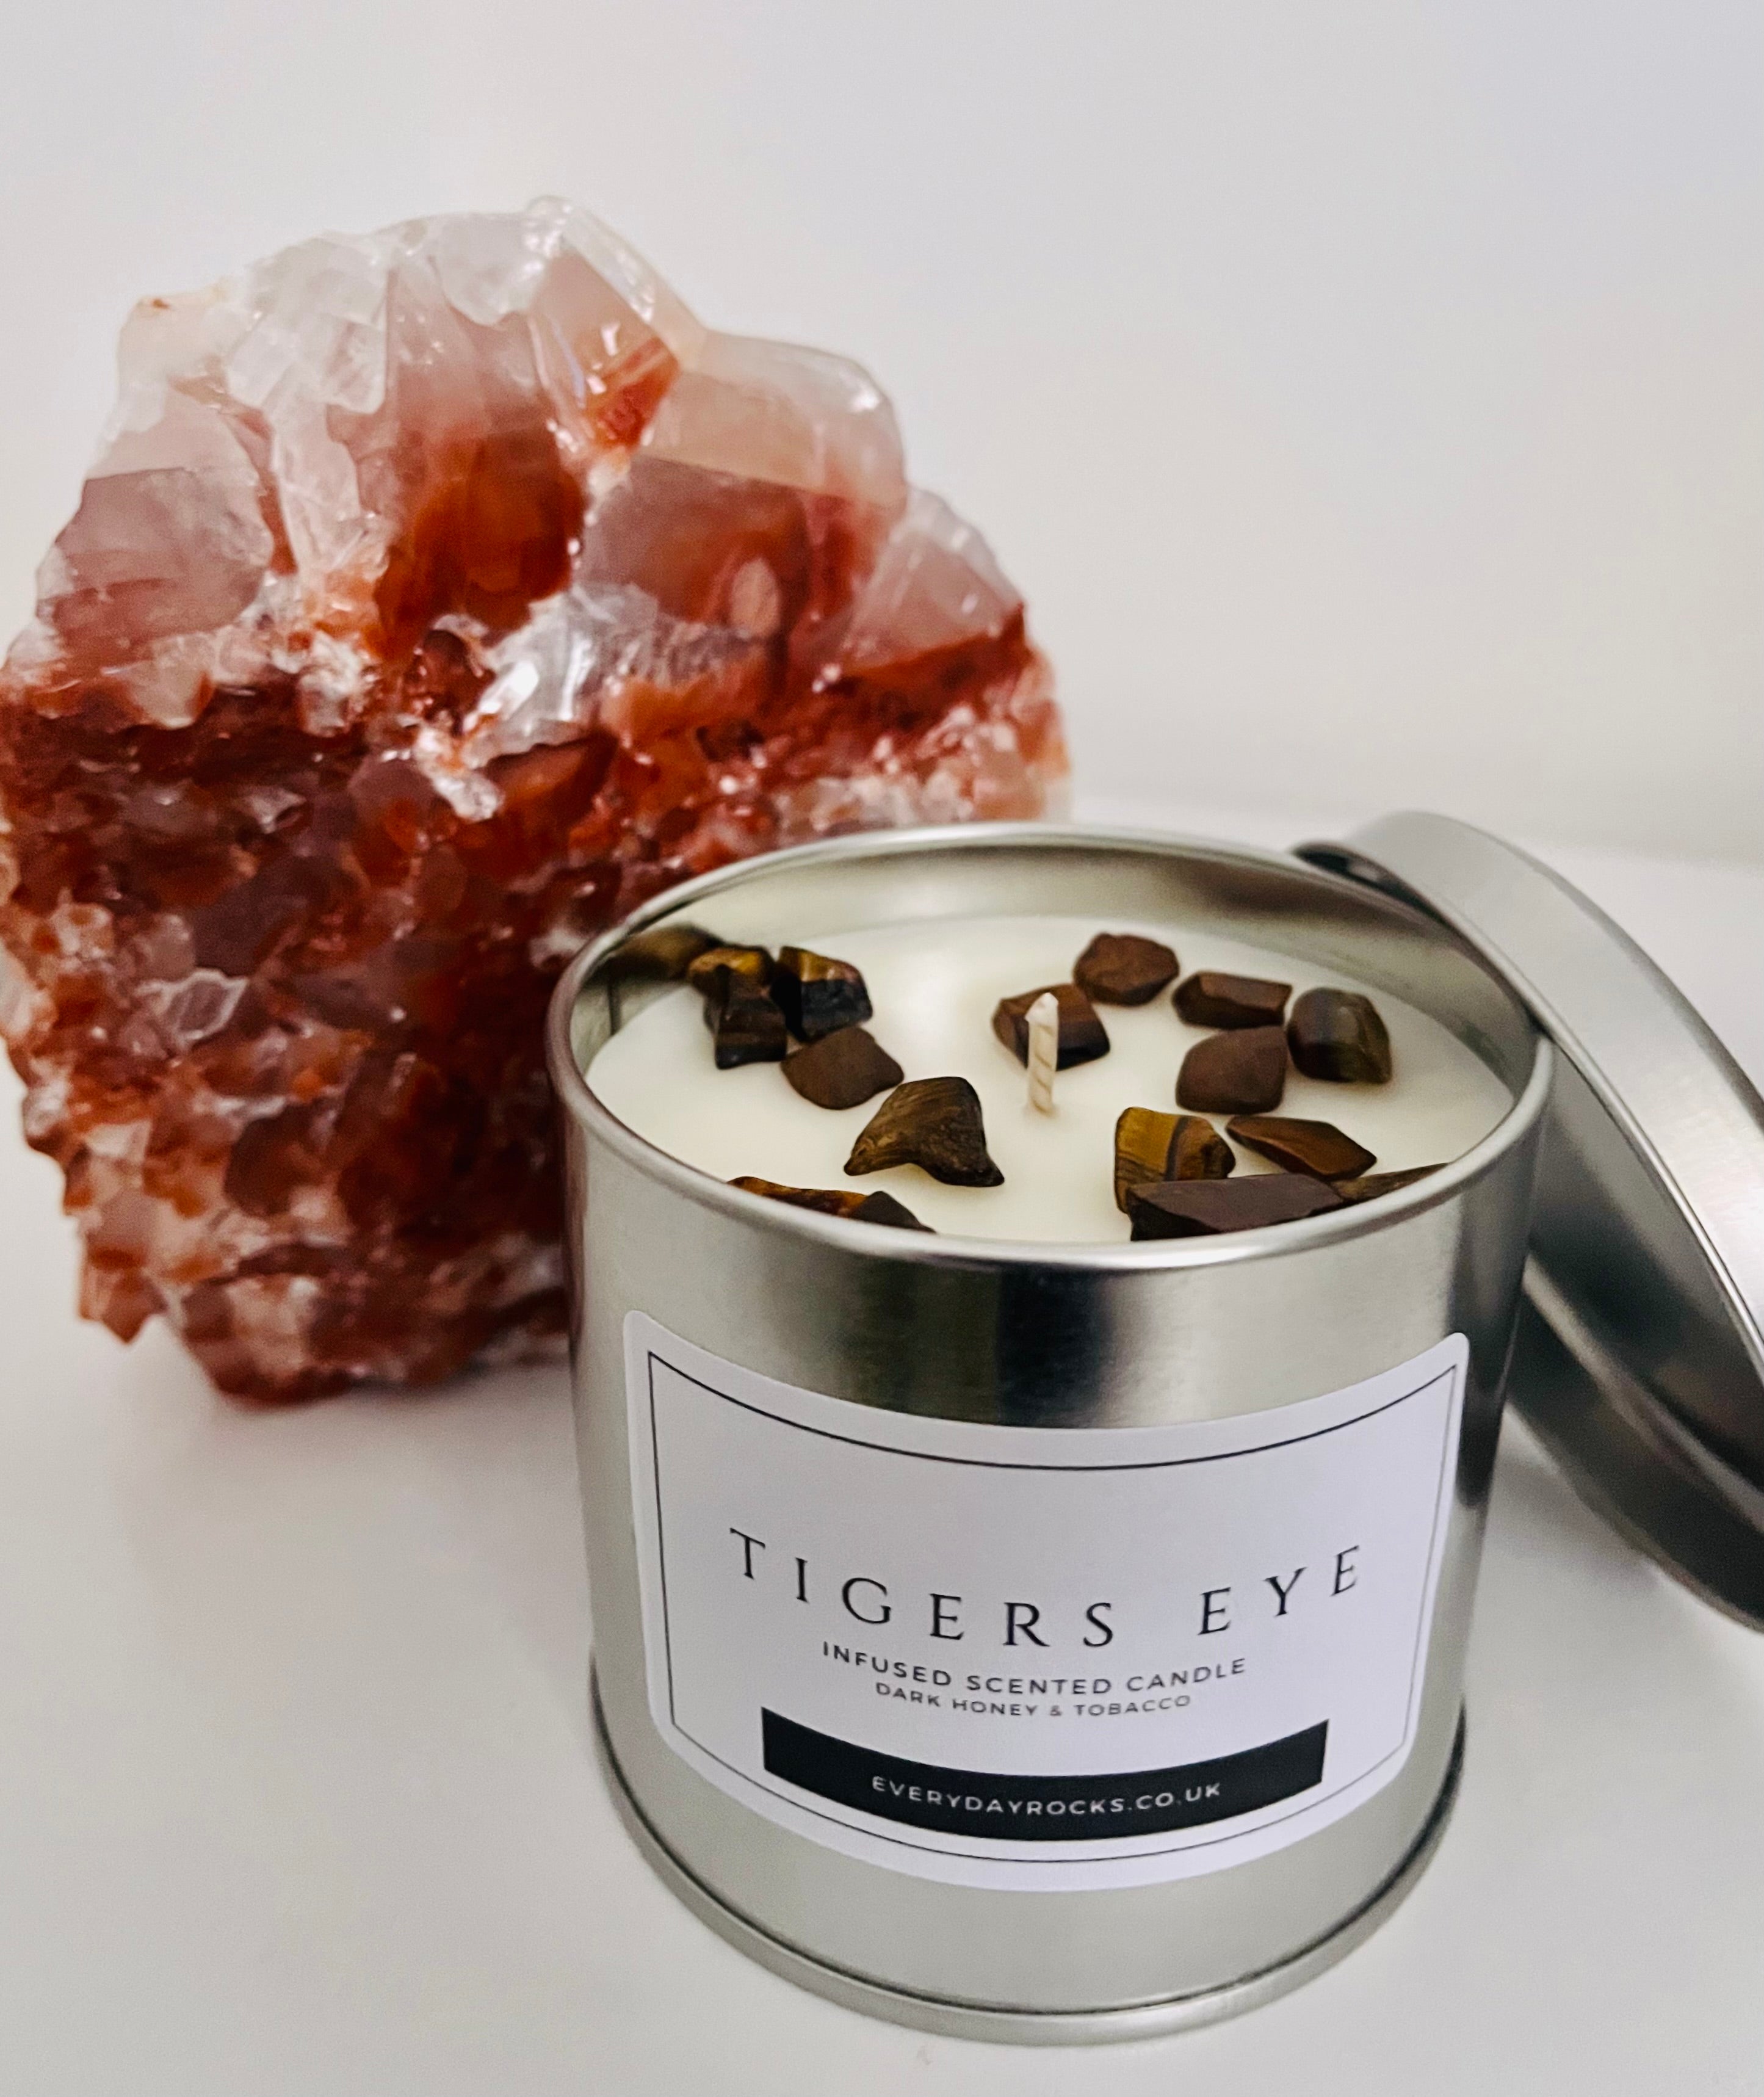 Tigers Eye Infused Scented Candle - Honey and Tobacco Fragrance